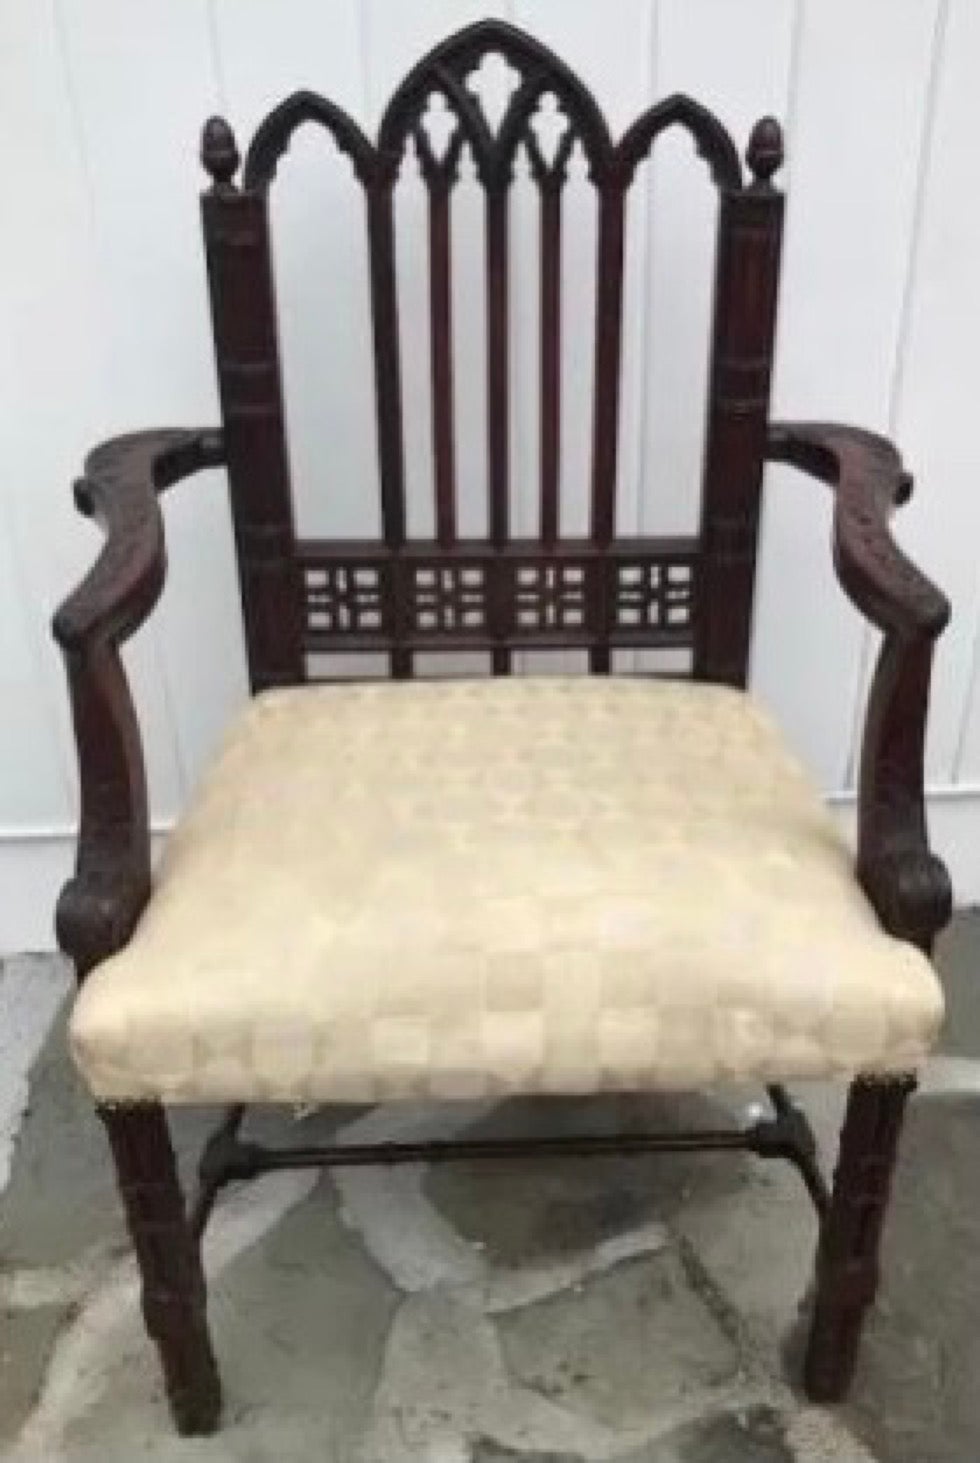 Antique 19th C Gothic Revival Carved Armchair. Mahogany tone frame with Neo Gothic design.
Hand Carved and Superb Condition Antique Gothic Revival Armchair Chair
 The backsplat has an open fretwork design of arched lancets and cross motifs